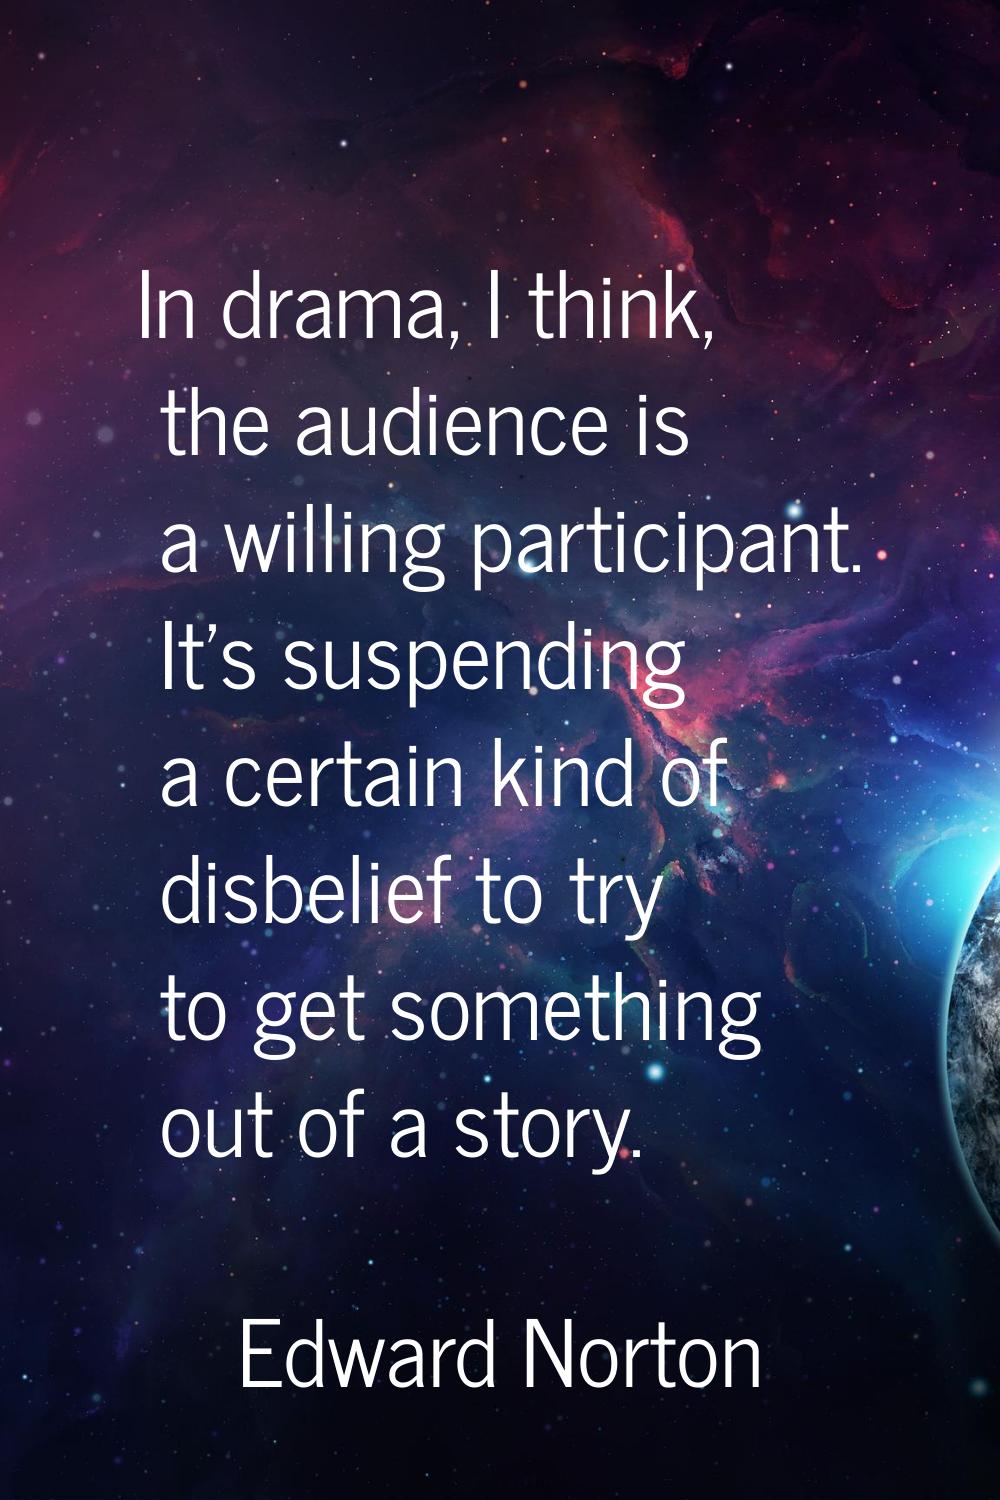 In drama, I think, the audience is a willing participant. It's suspending a certain kind of disbeli